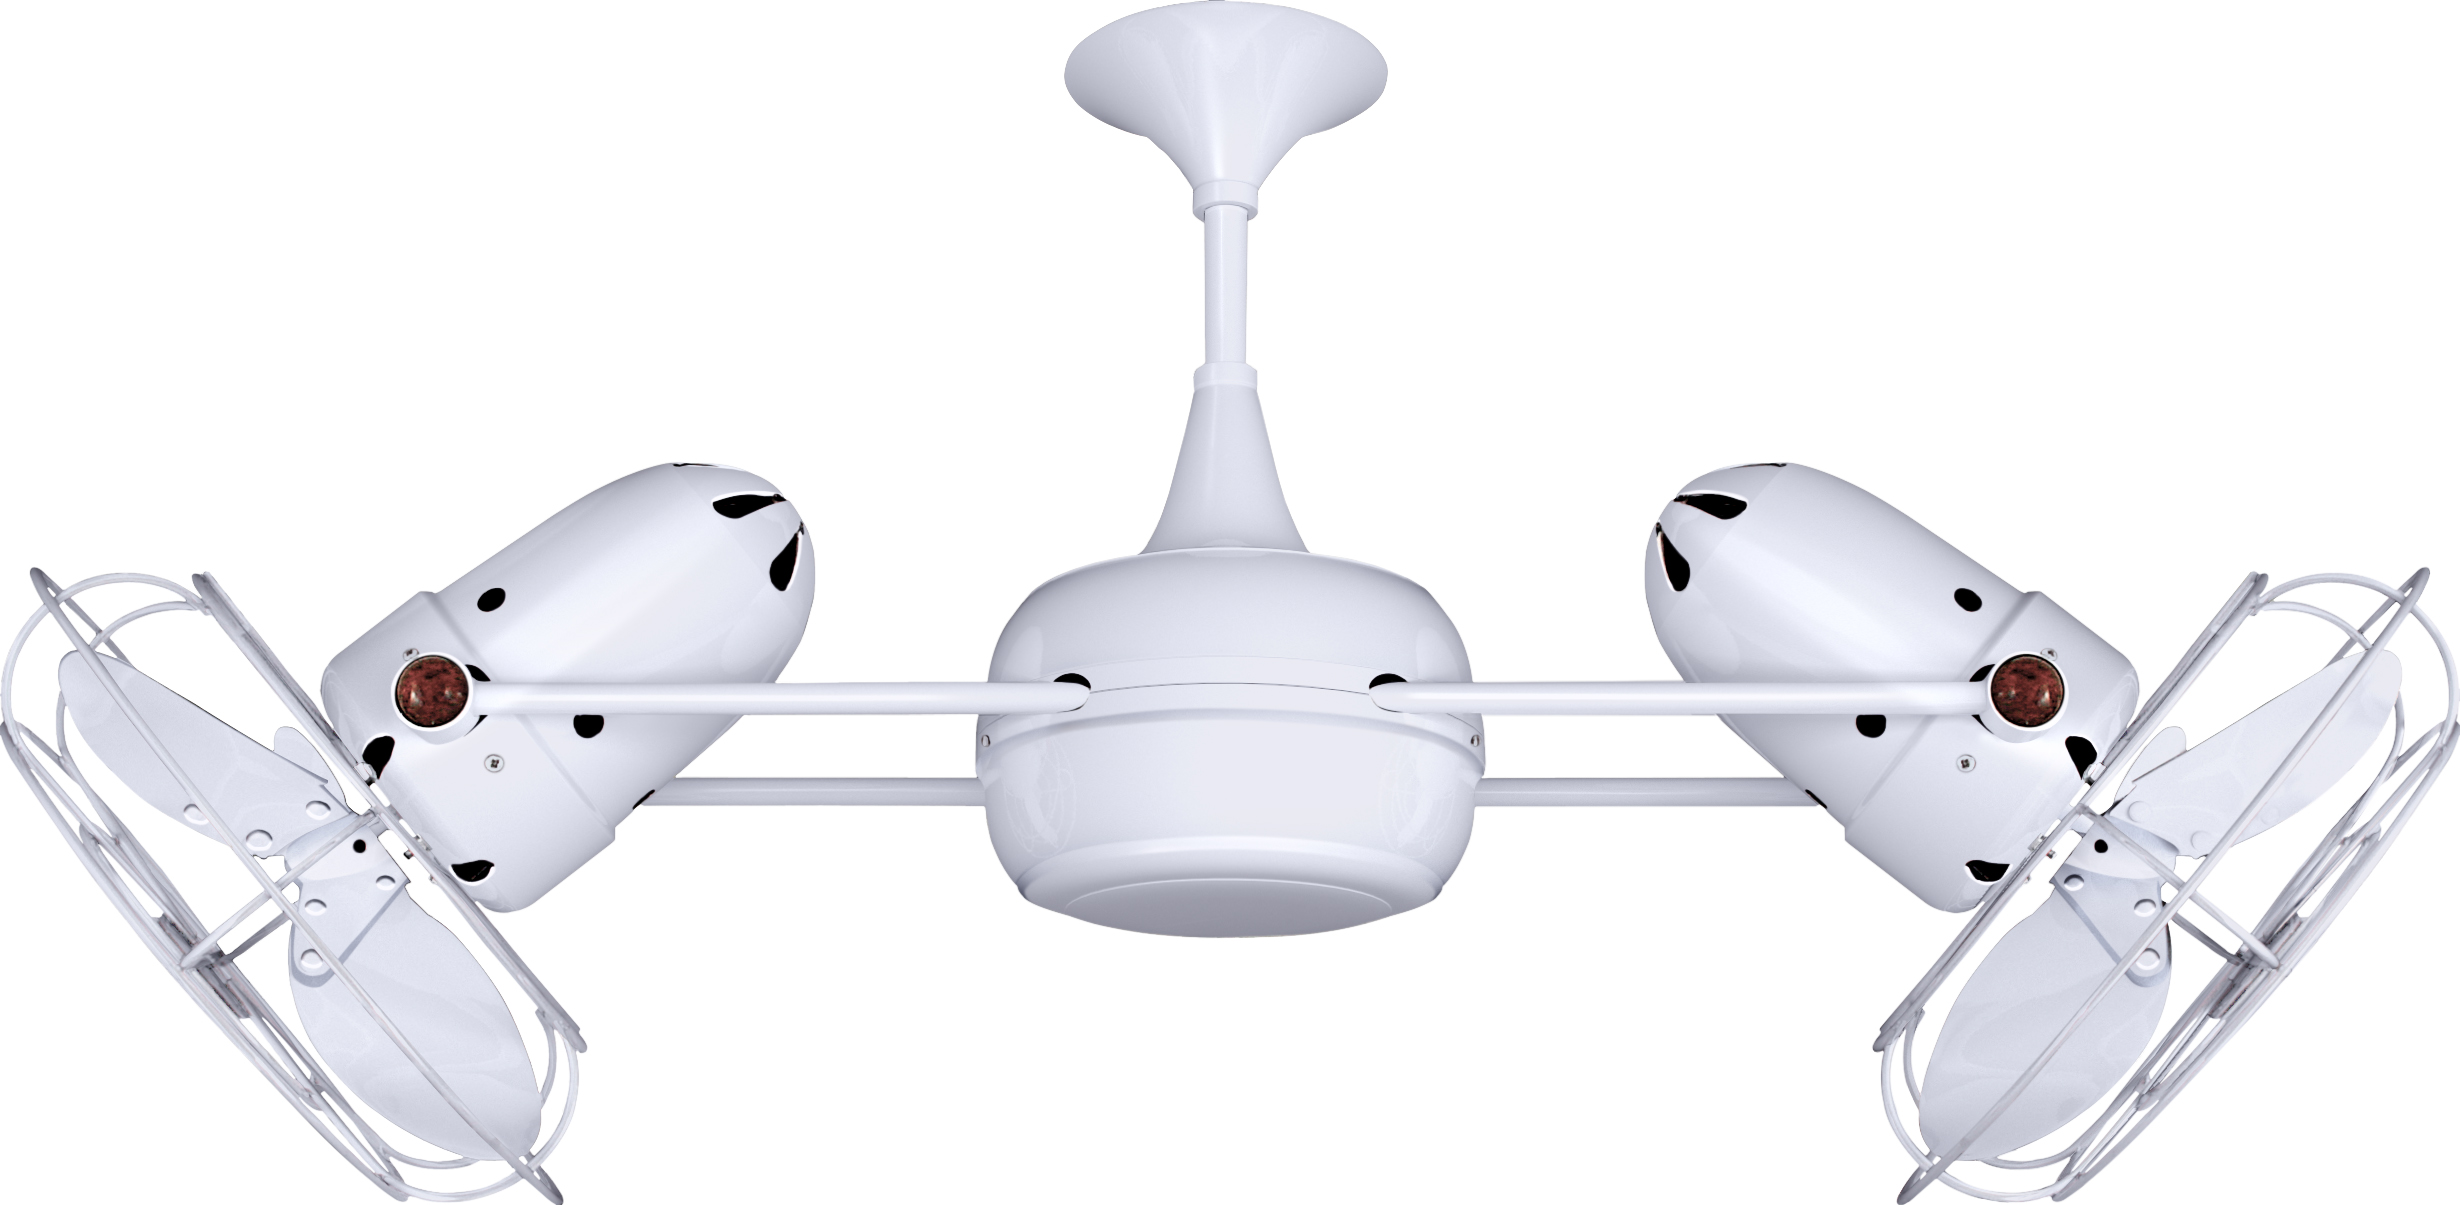 Duplo Dinamico rotational dual head ceiling fan in Gloss White finish with Metal blades made by Matthews Fan Company.